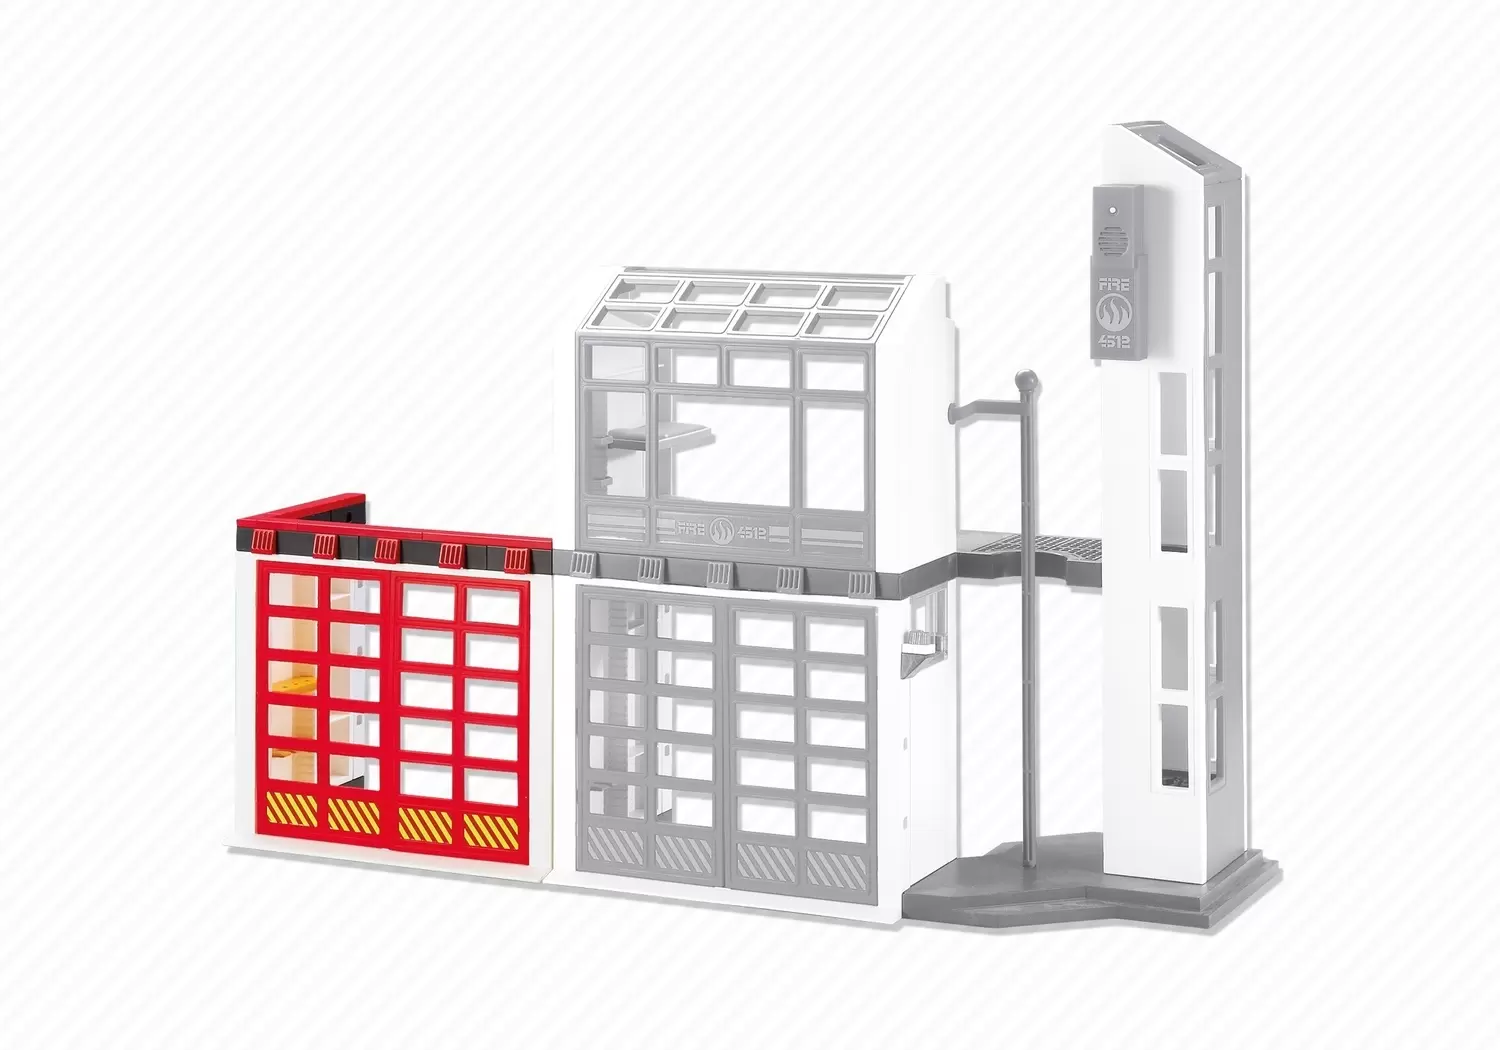 Playmobil Accessories & decorations - Extension for Fire Station